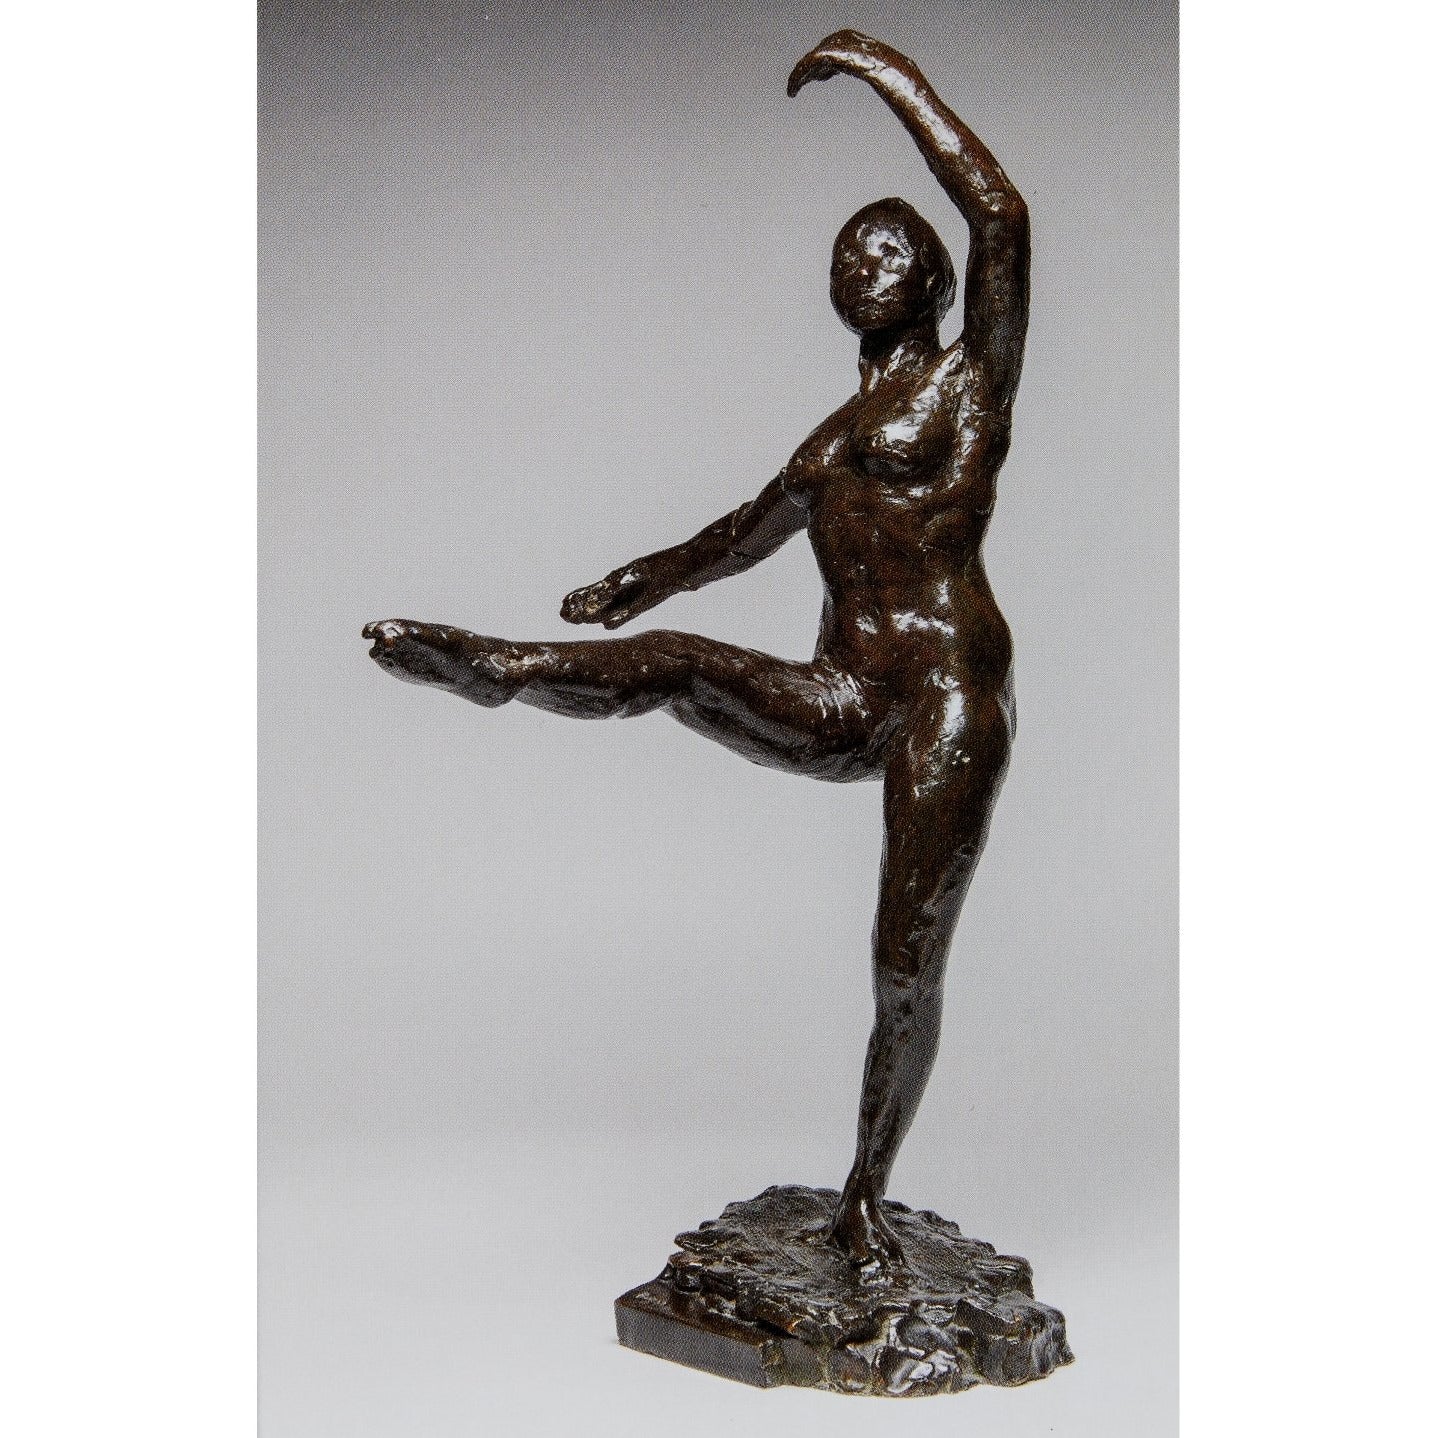 Notecard - Dancer, Fourth Position in Front on the Left Leg by Edgar Degas. From the collection of the Fitzwilliam Museum, brought to you by CuratingCambridge.co.uk